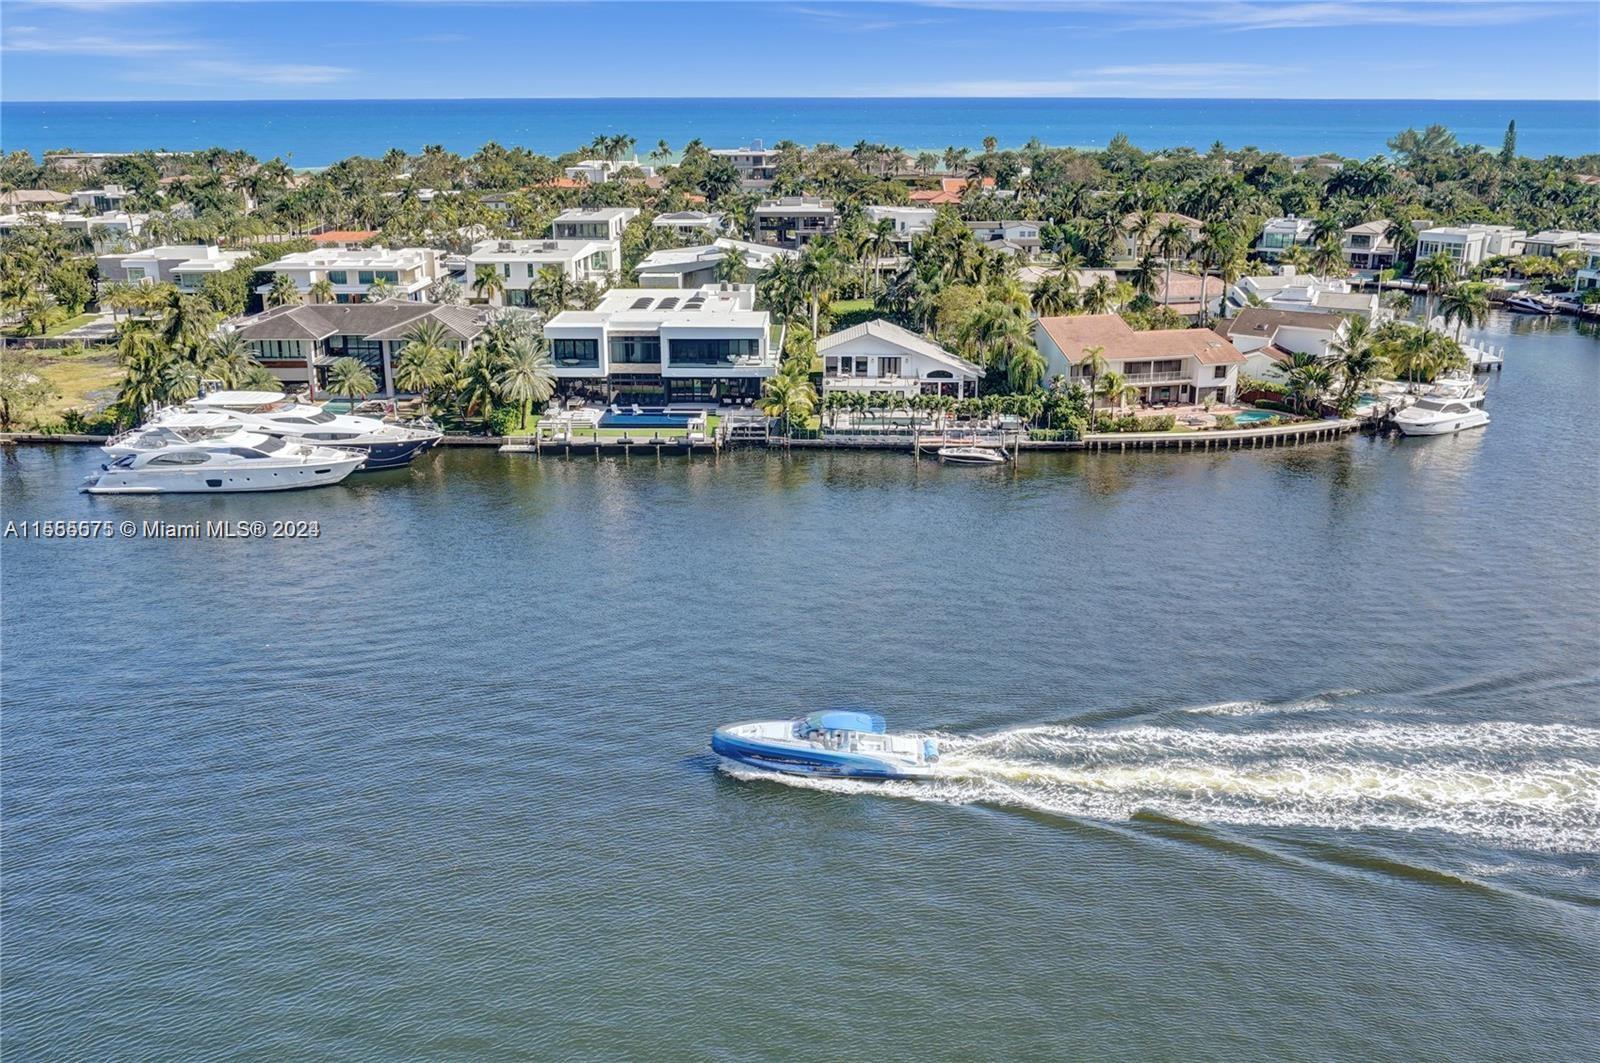 This waterfront flow-through unit with magnificent unobstructed Direct Ocean, Intracoastal and PGA Golf Course Views offers: Almost 3,000 sqft of luxury living space, Private Elevator, Enormous living room, Formal dining room, Open kitchen, Two spacious balconies, Custom built walk-in closet, Separate oversized laundry room w/extra full bathroom. Den is enclosed with double French door and is used as a third bedroom. Luxury style amenities include: Infinity Lap Pool, 100 Seat Movie Theater, 4 Tennis Courts, State-of-the-Art Fitness Center, Exclusive Restaurant, Internet Café, Kids room/nursery, BBQ Area, Elegant building lobby and concierge at the front desk. Located minutes to the beach, 3.5 mile walking and biking path, close to restaurants, shopping, major highways and Excellent Schools